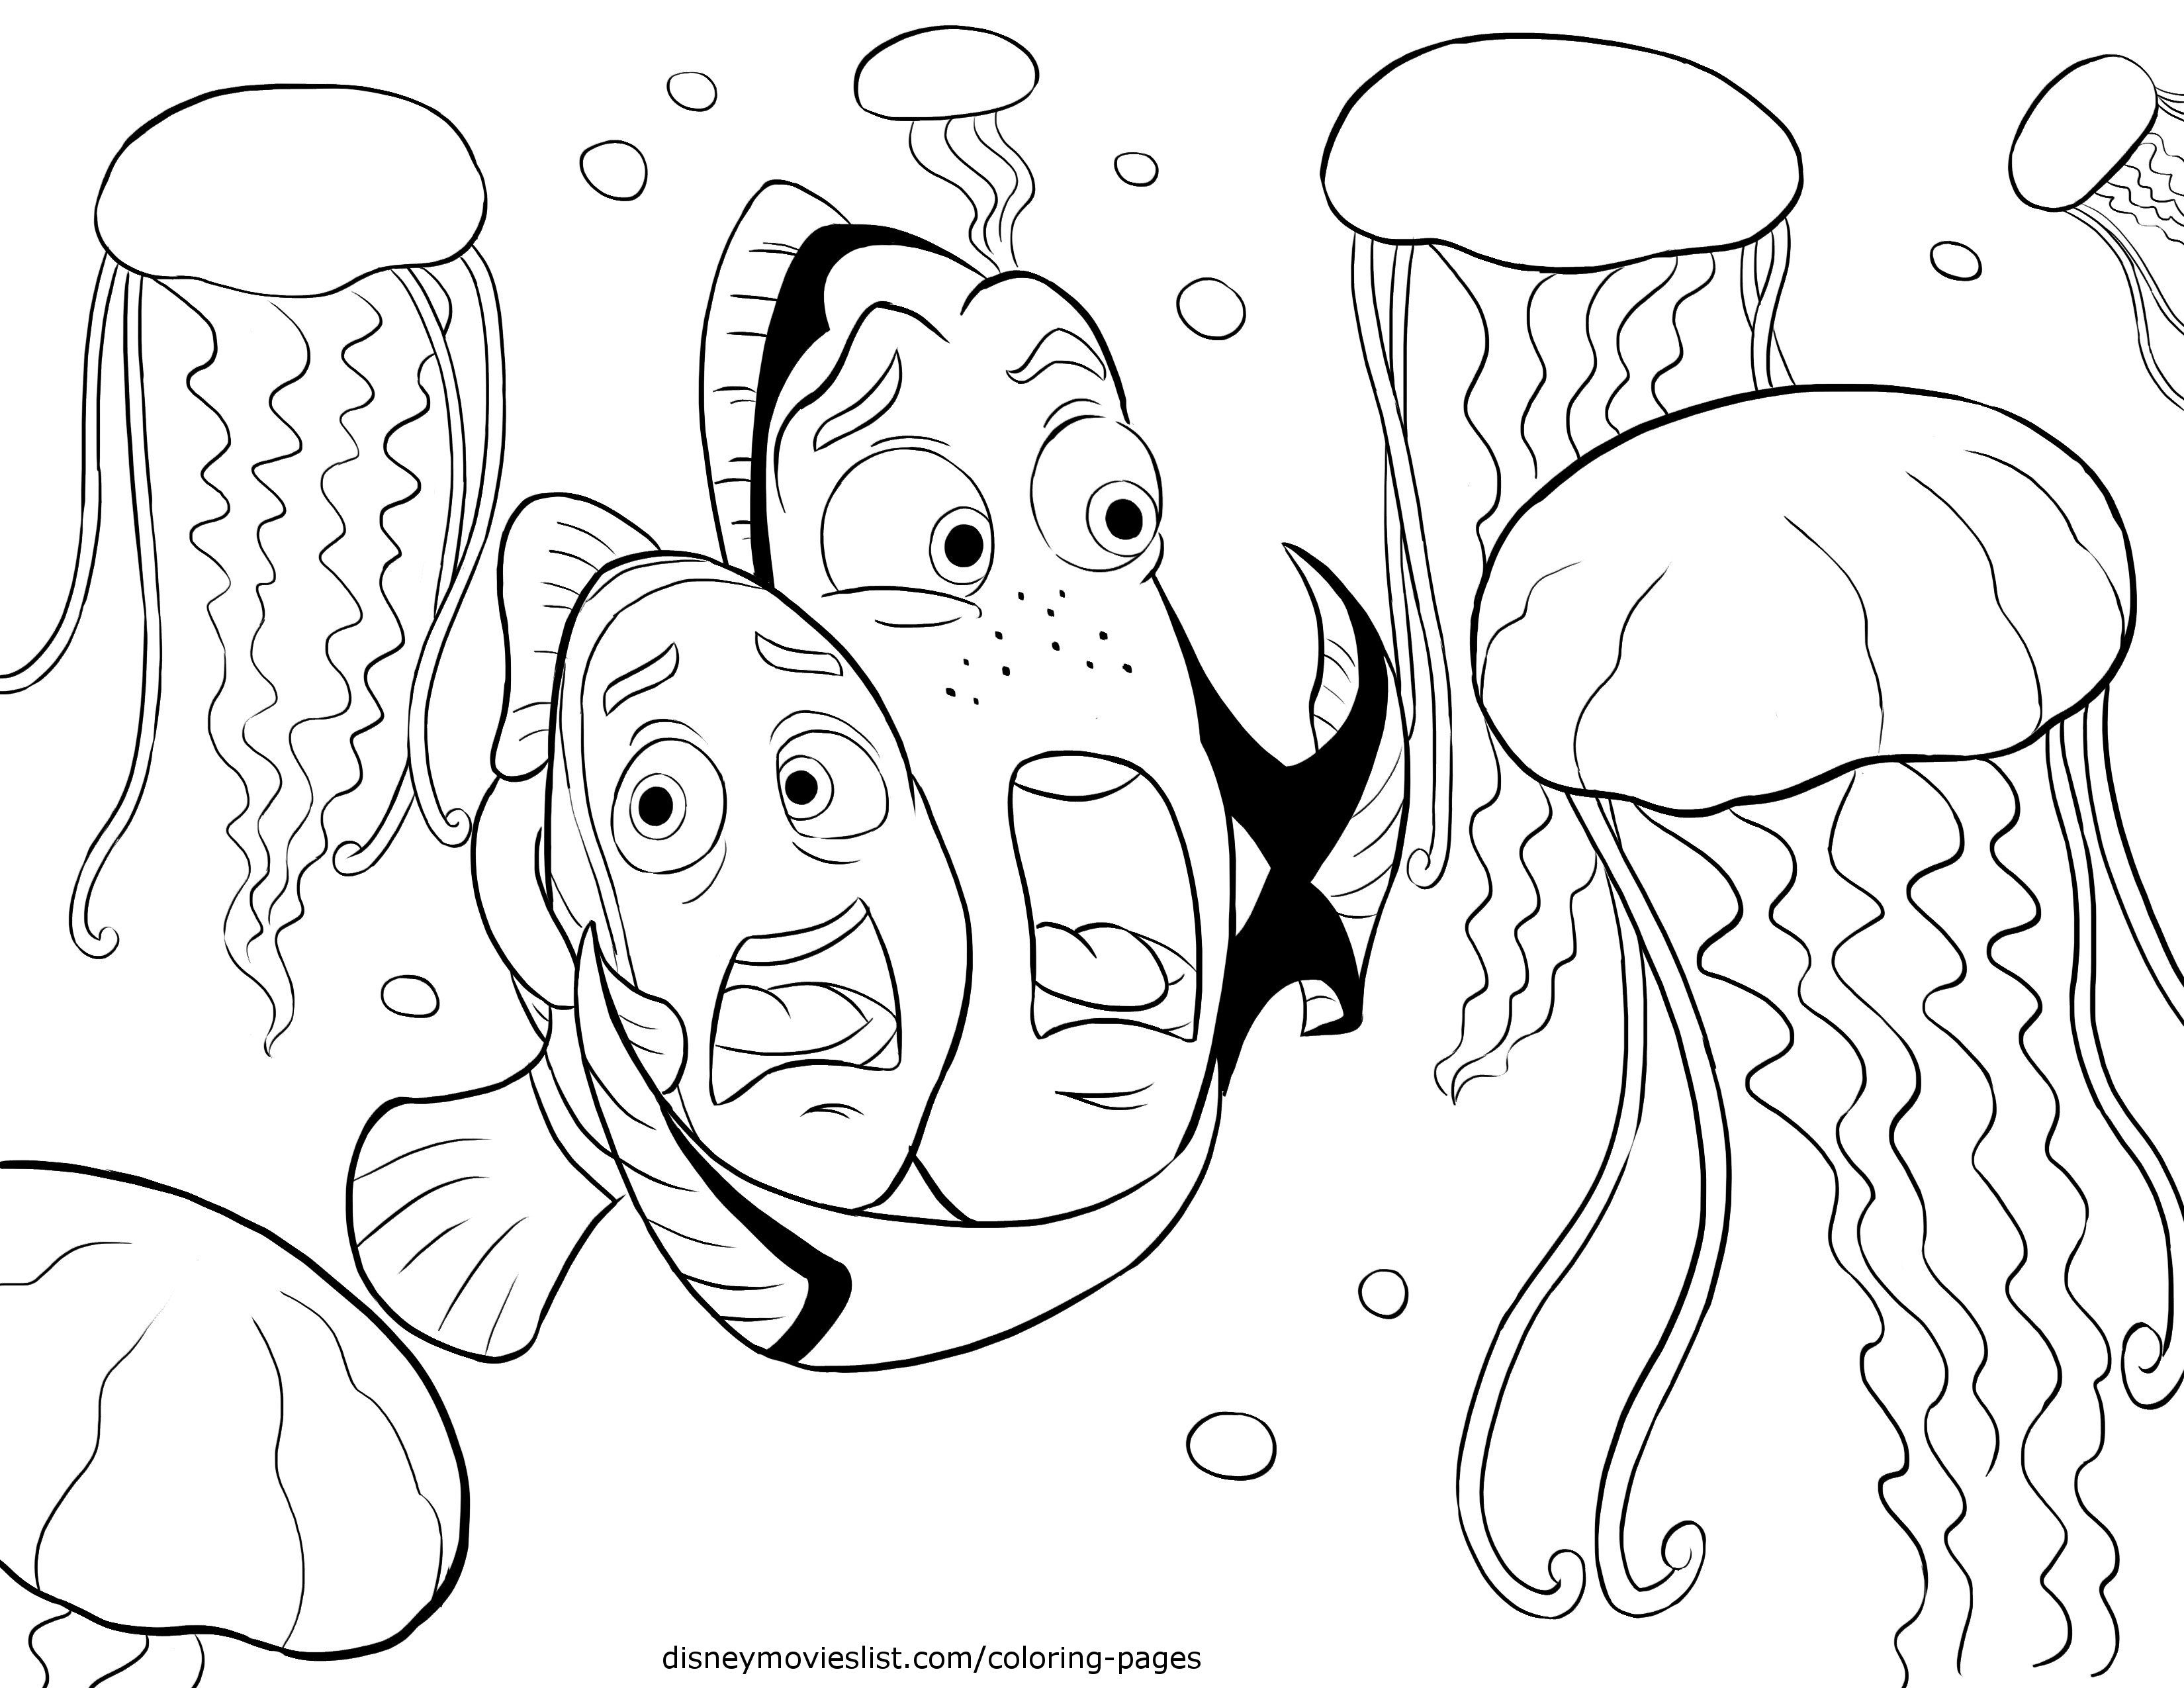 Disney'S Finding Nemo Coloring Pages Sheet, Free Disney avec Coloriage Finding Dory